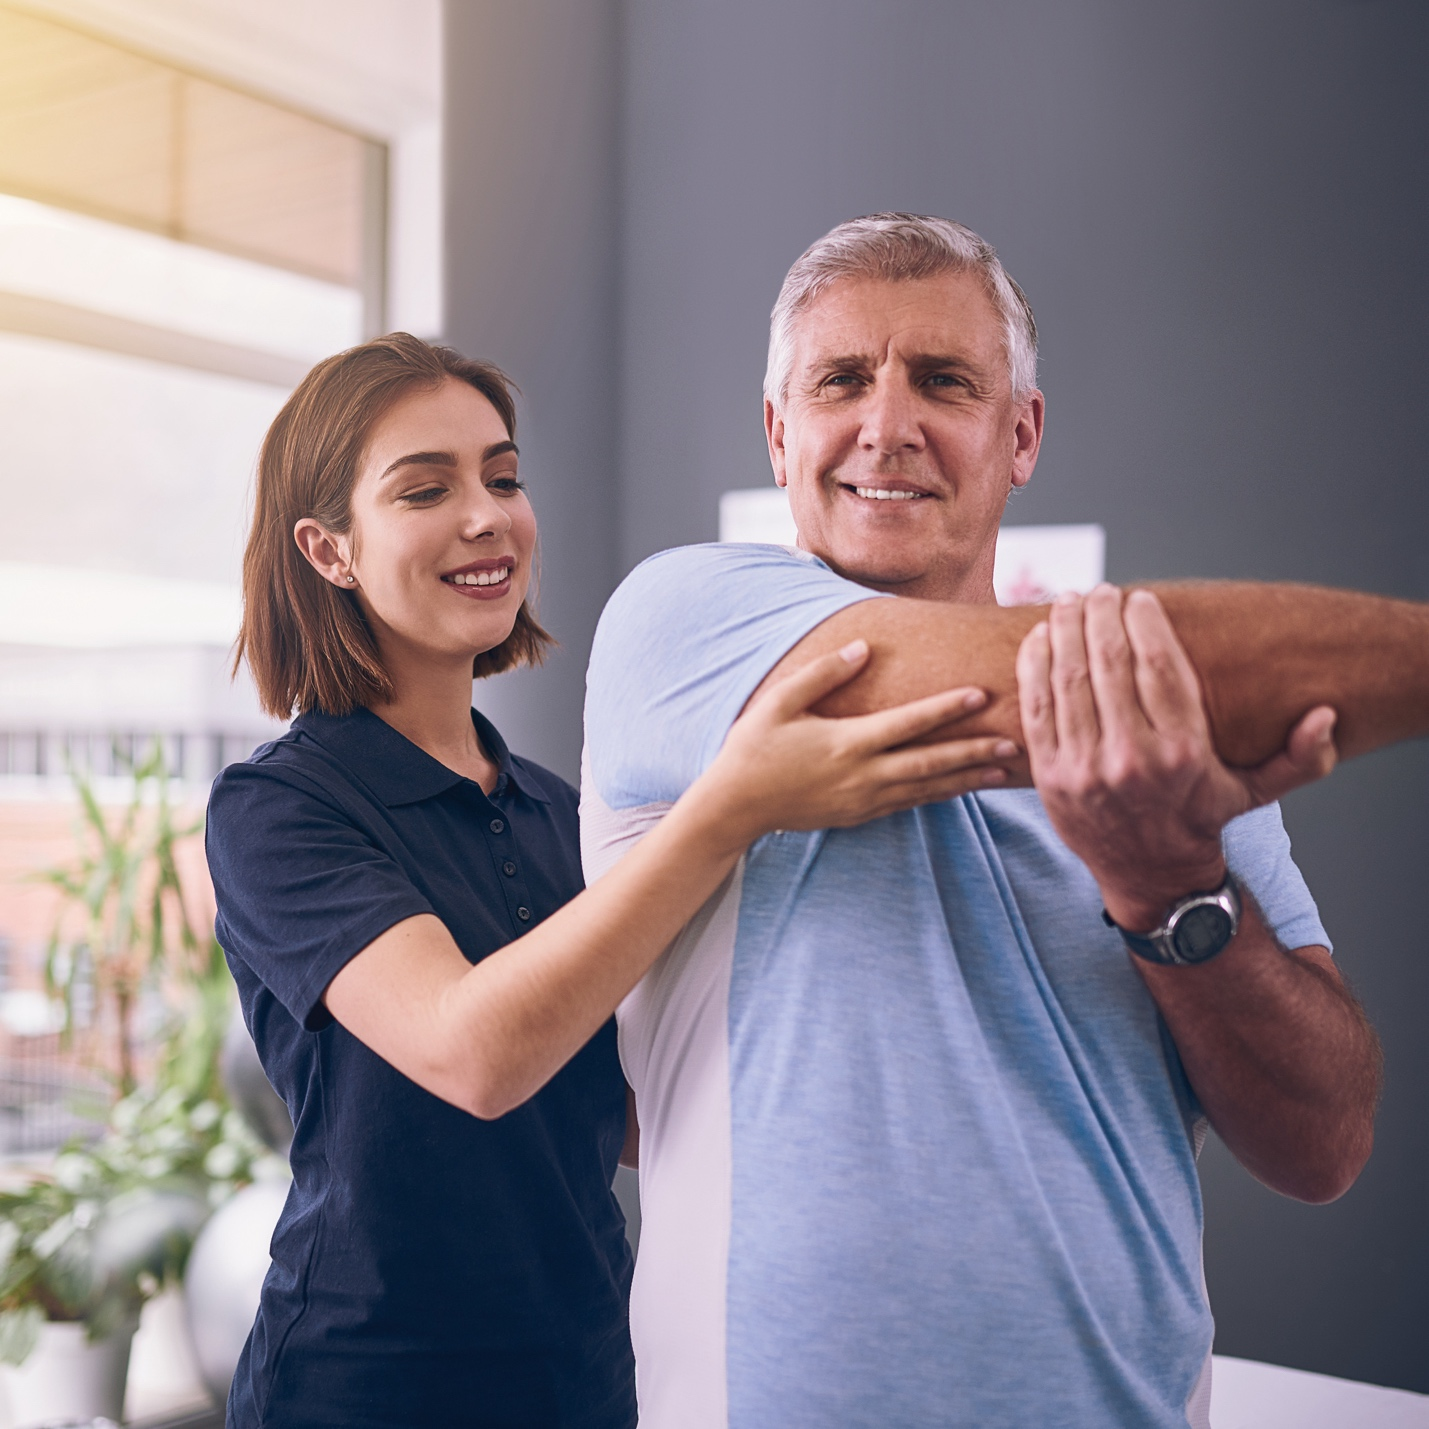 A woman physical therapist supervising a man doing a shoulder stretch